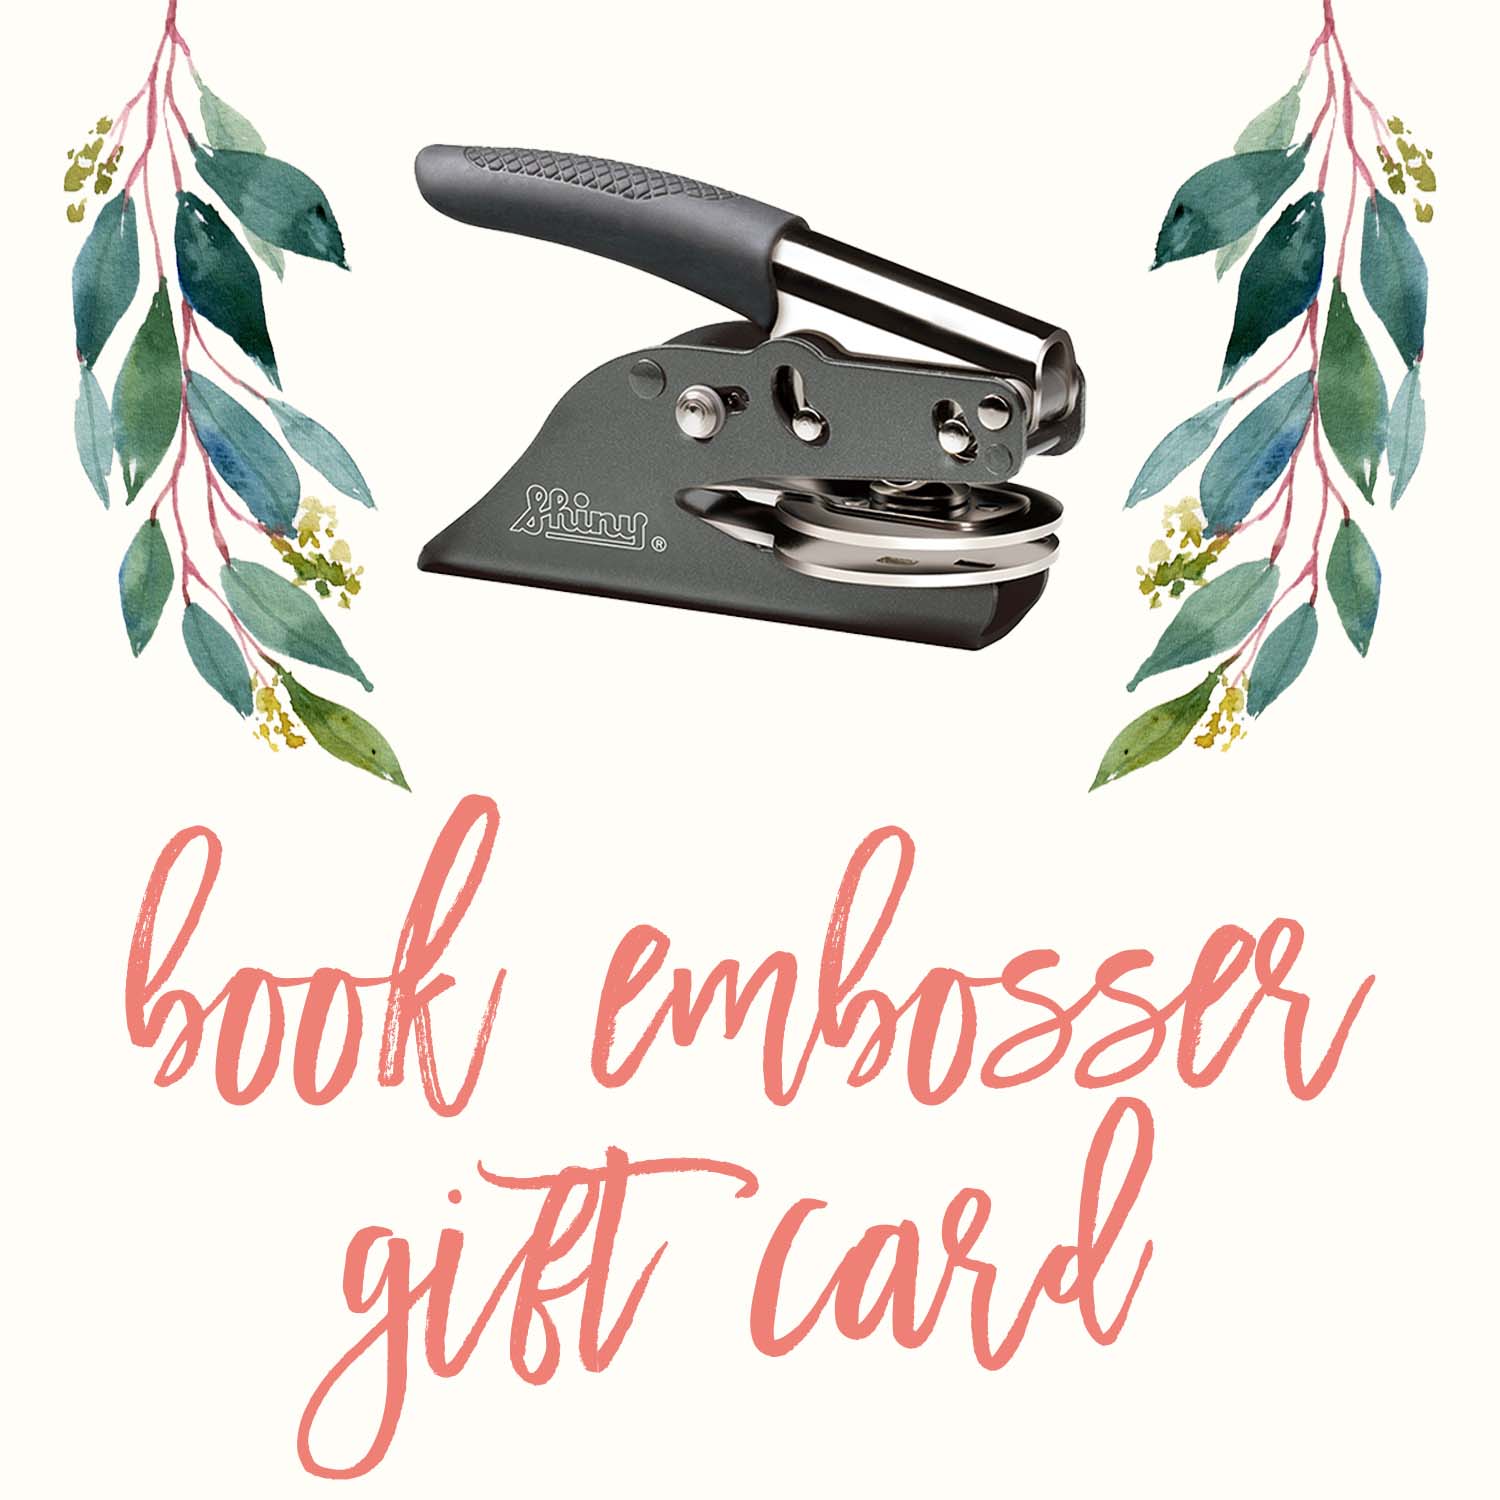 Book Embosser Gift Card - Boutique Stamps & Gifts